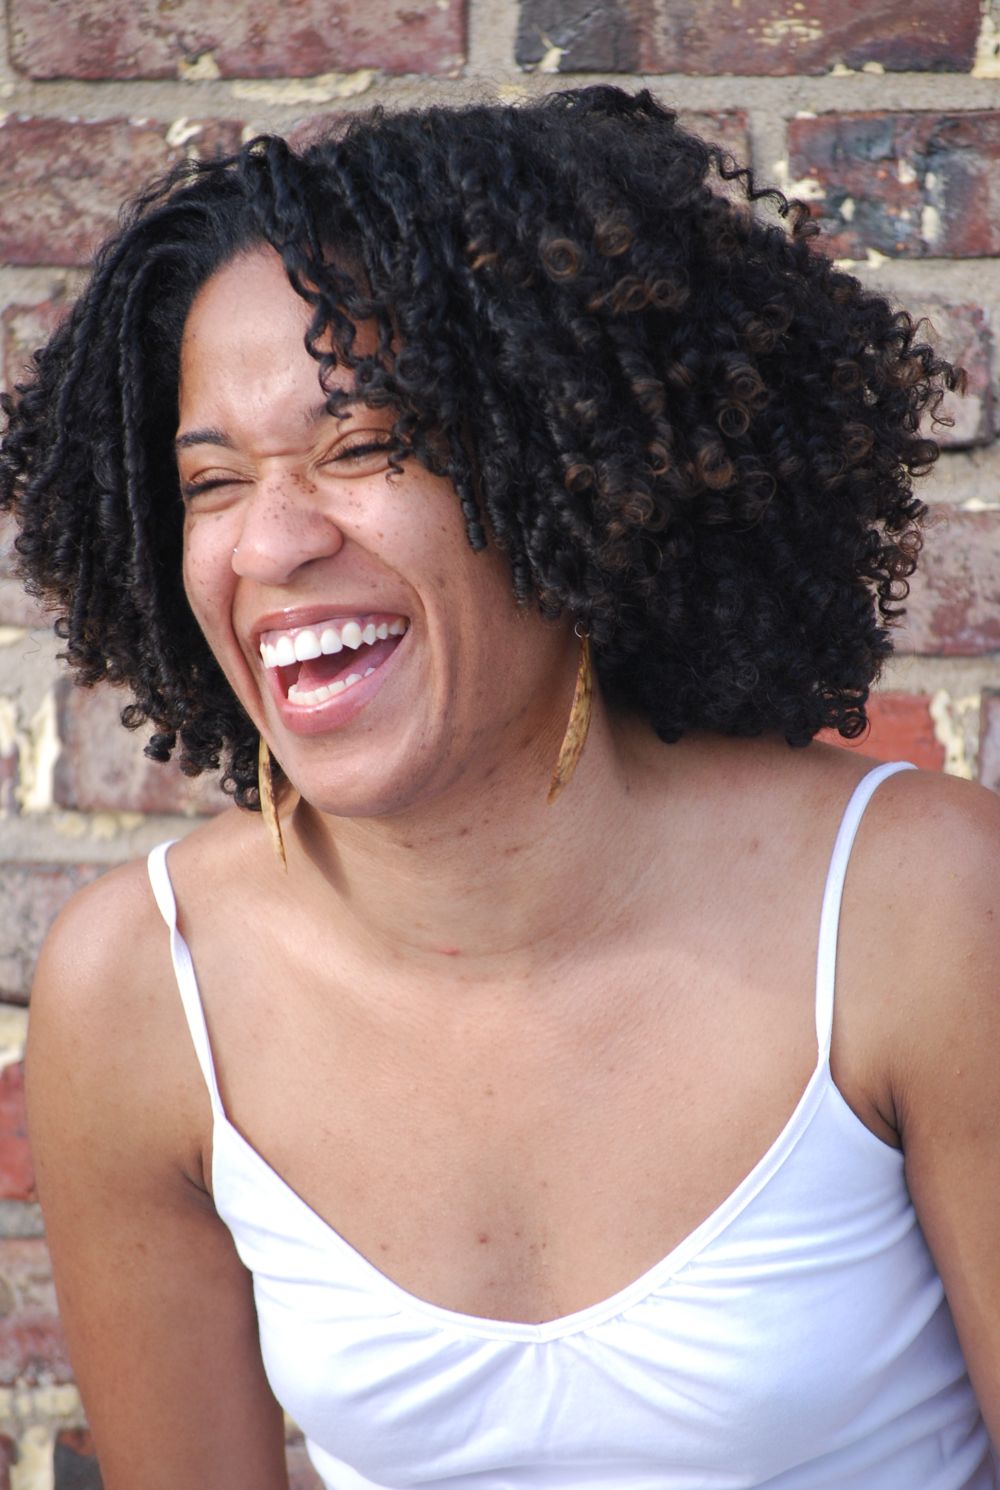 Photo of woman laughing against a brick wall background